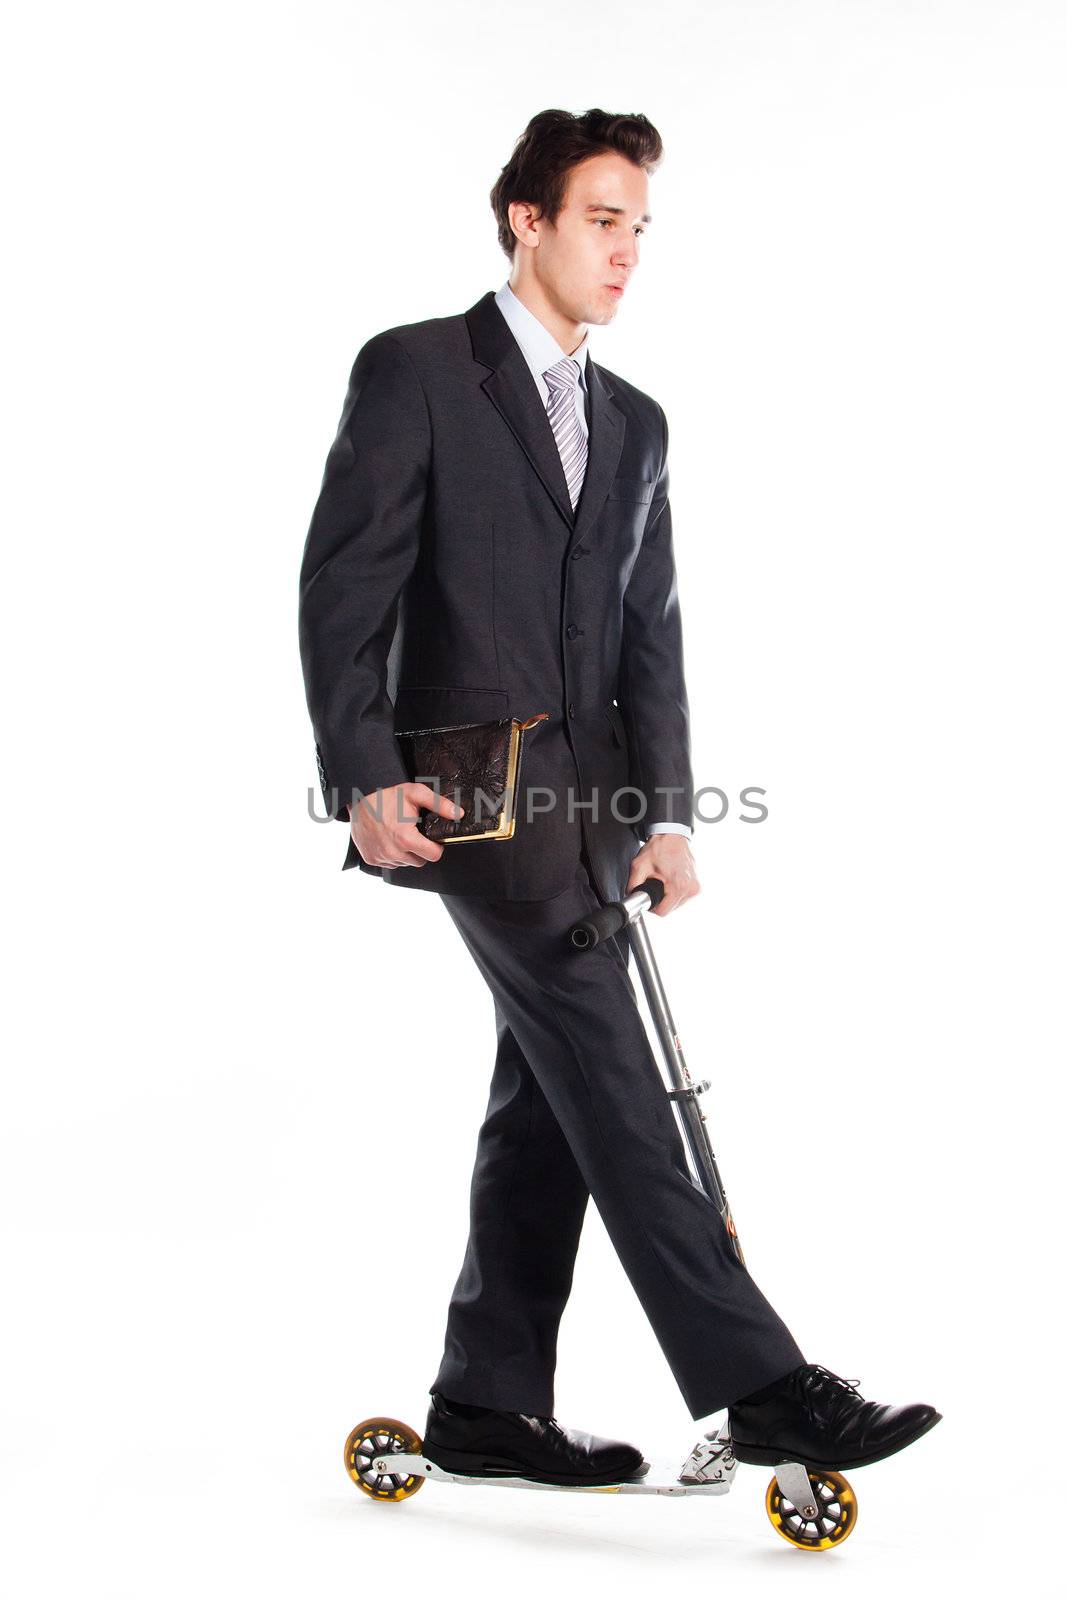 Portrait of a young respectable and successful man in a dark business suit who rides a scooter